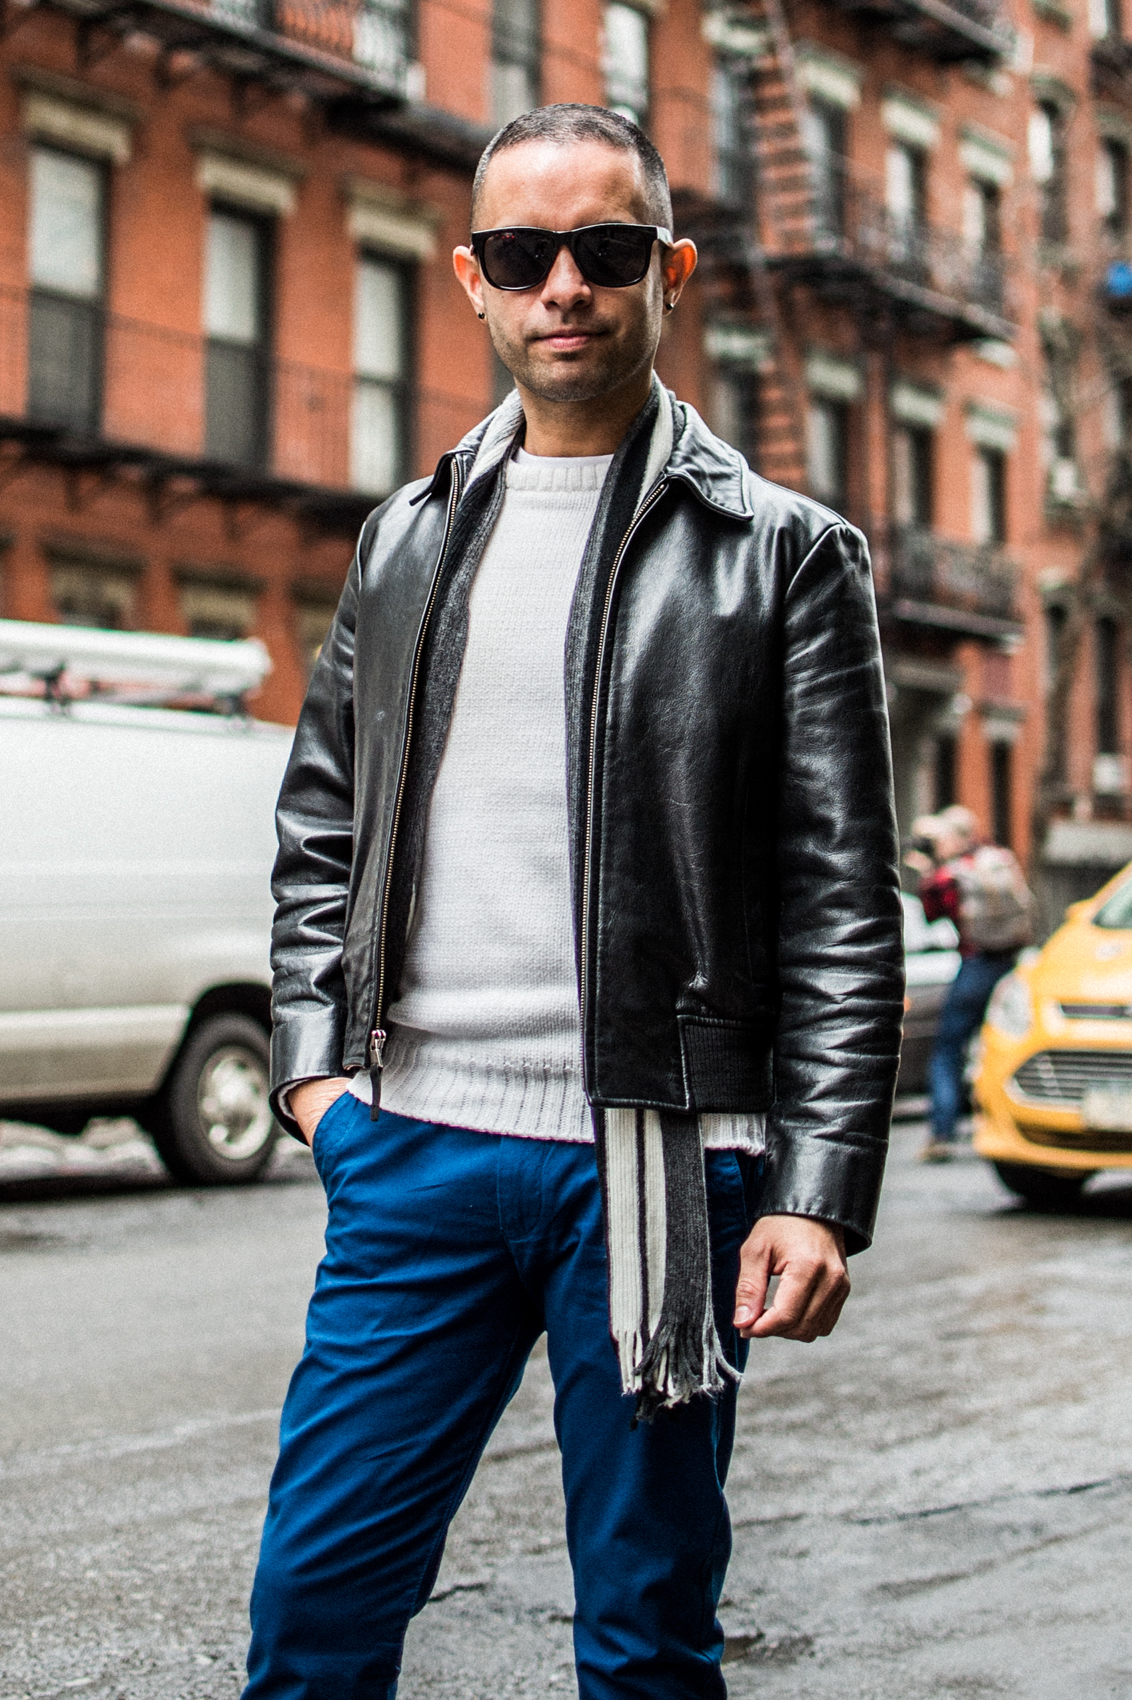 The 35 Best Street Style Looks From New York Men’s Fashion Week | Sharp